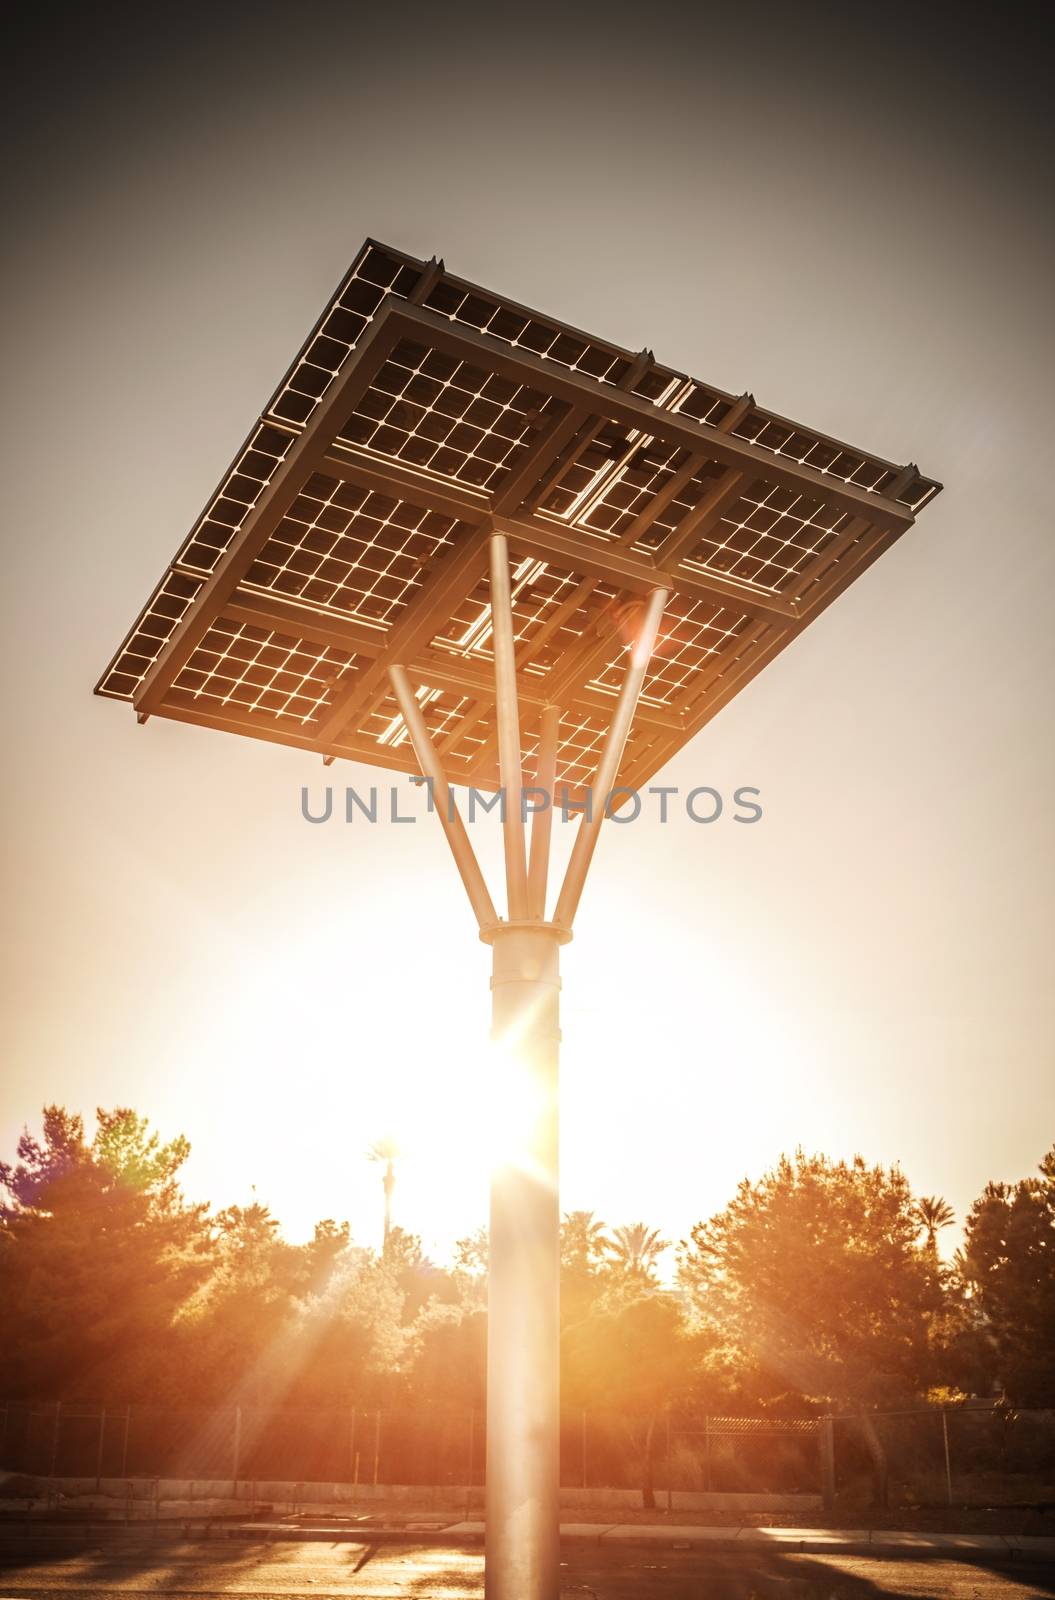 Small Solar Panel on the Pole in Nevada, United States. Solar Power Technology.